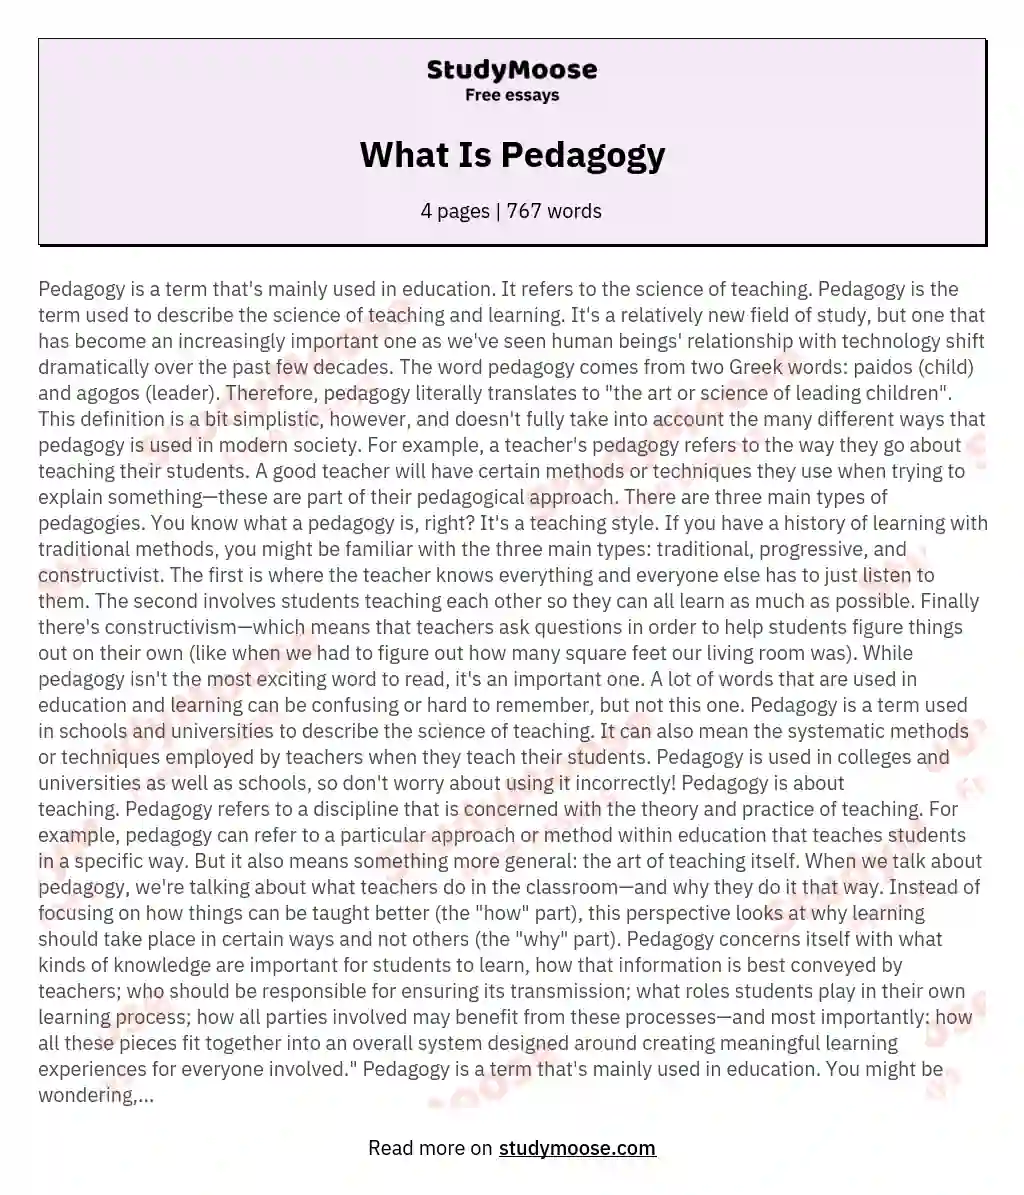 What Is Pedagogy essay